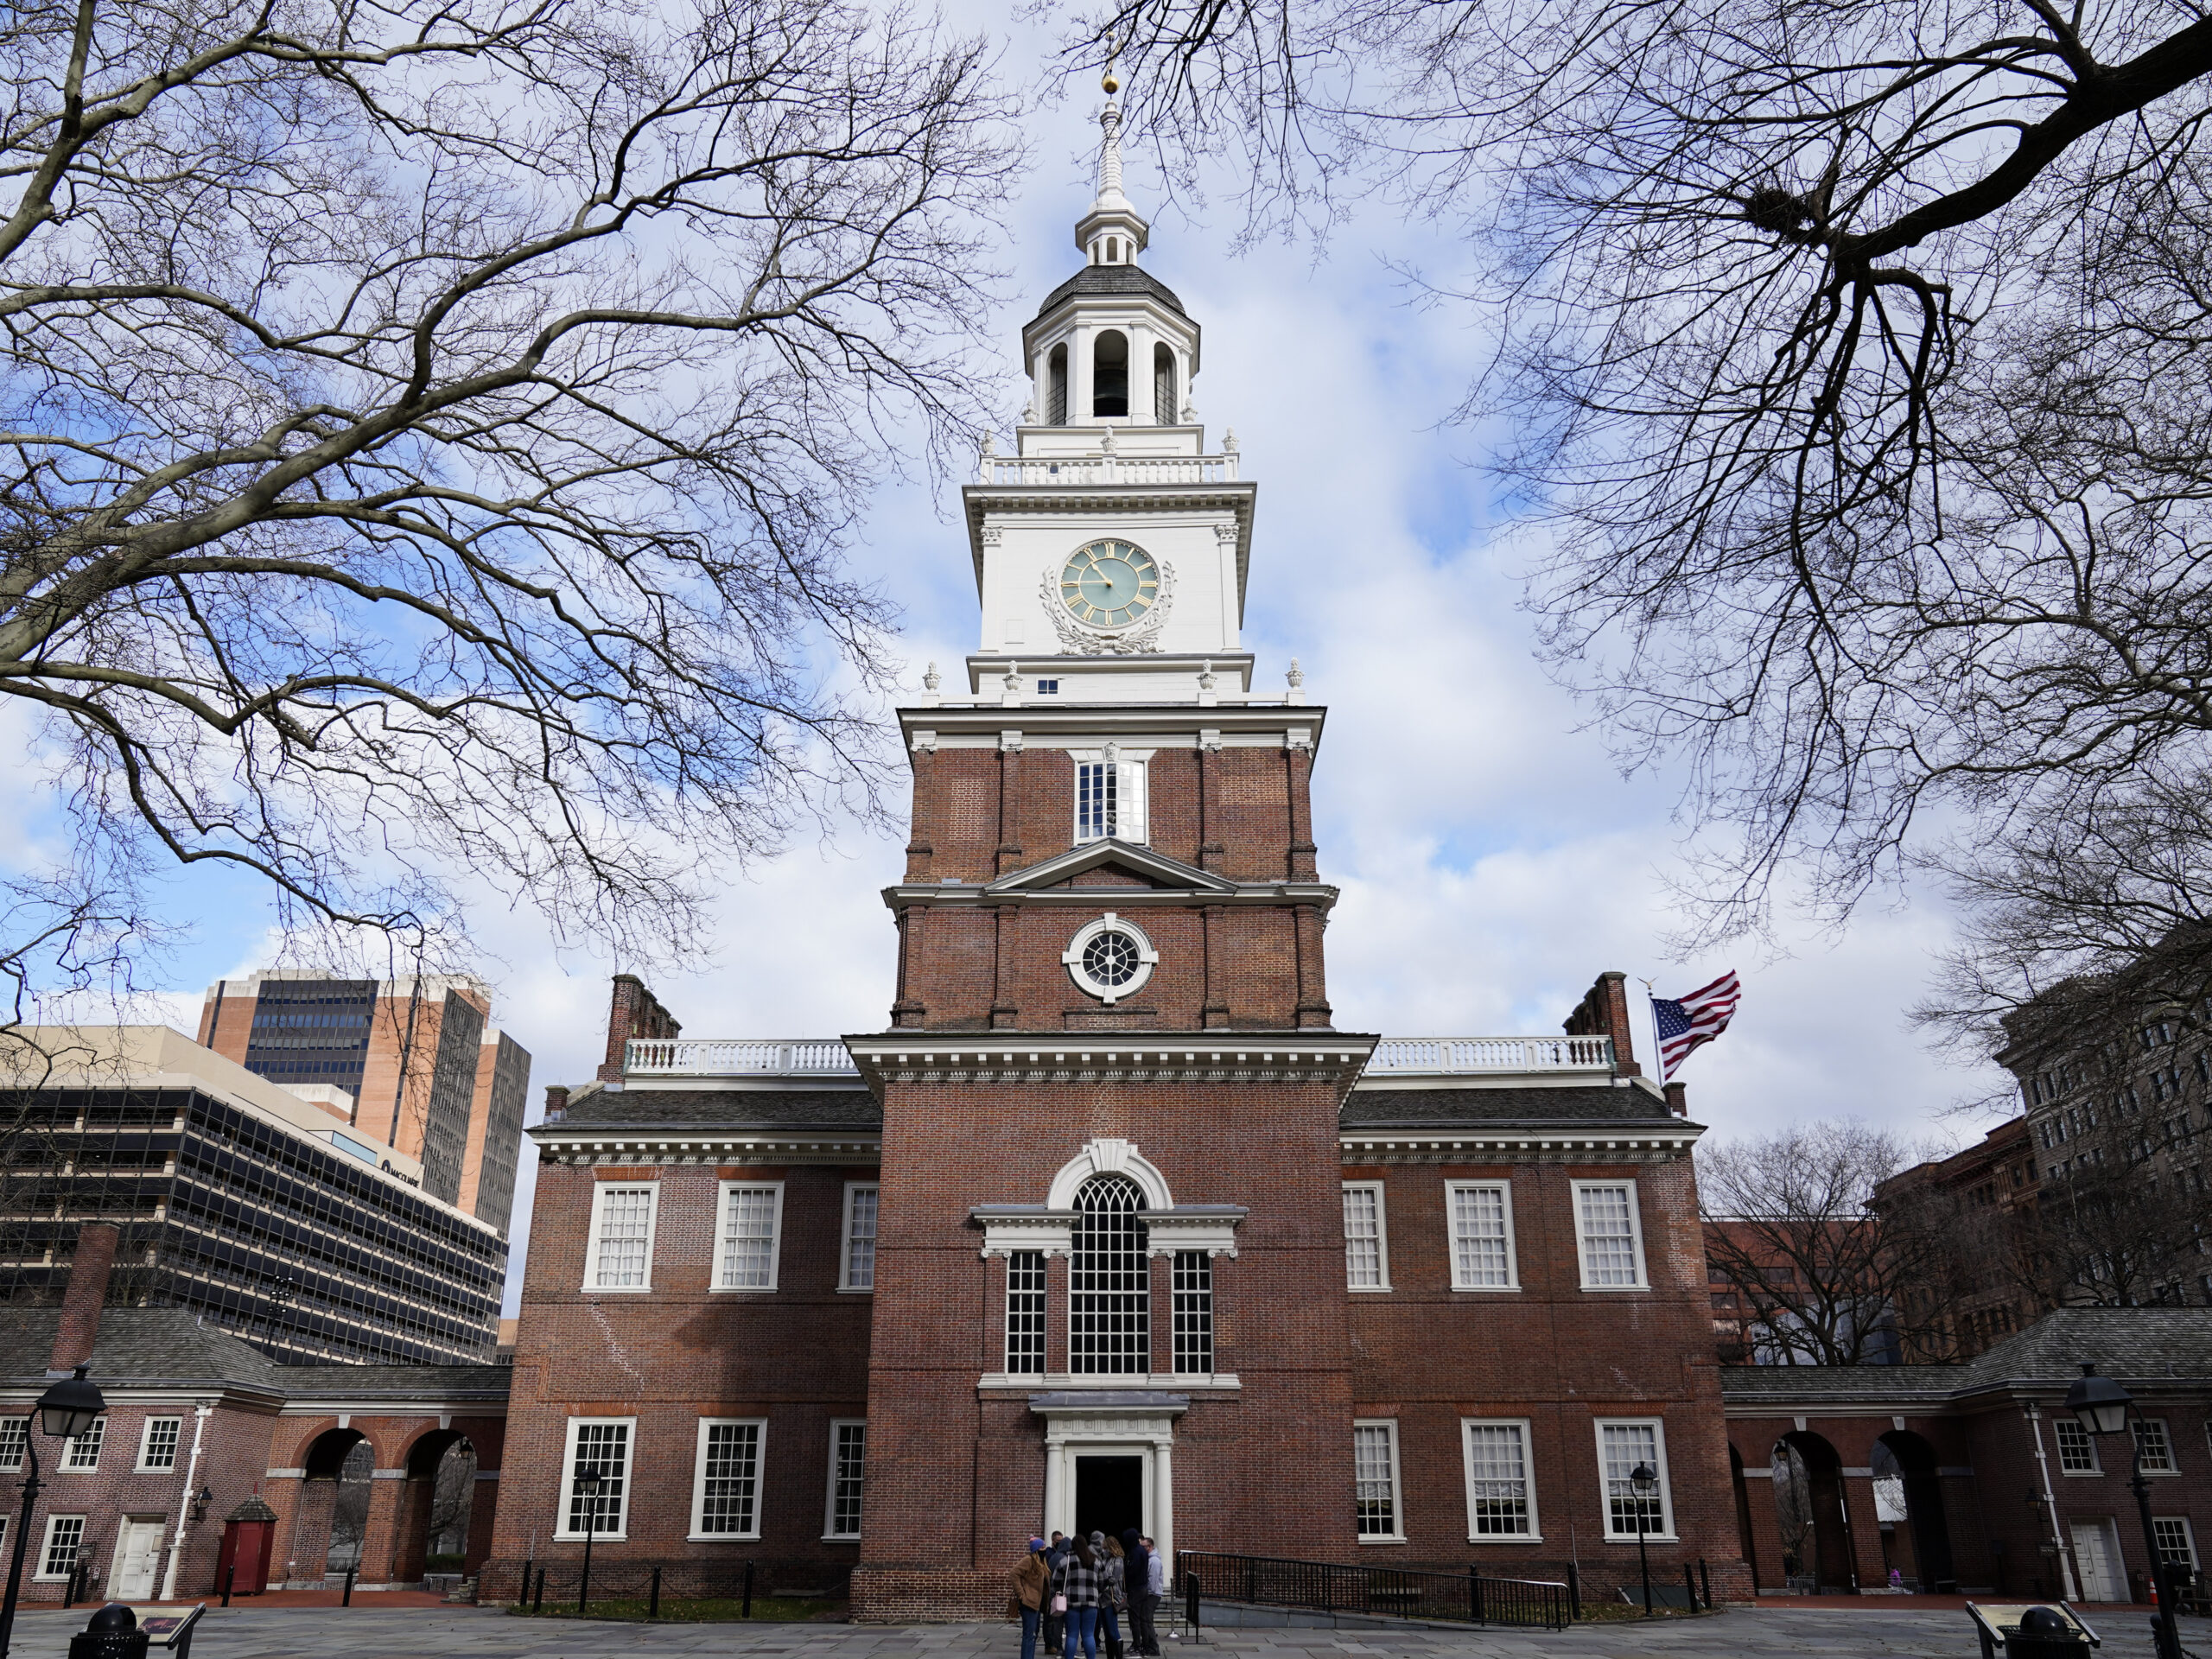 Independence Hall in Philadelphia in 2021. The National Park Service plans to install gas-fired boilers at Independence National Historical Park, despite a 2007 law mandating new and remodeled federal buildings be 100% free of fossil fuels by 2030.